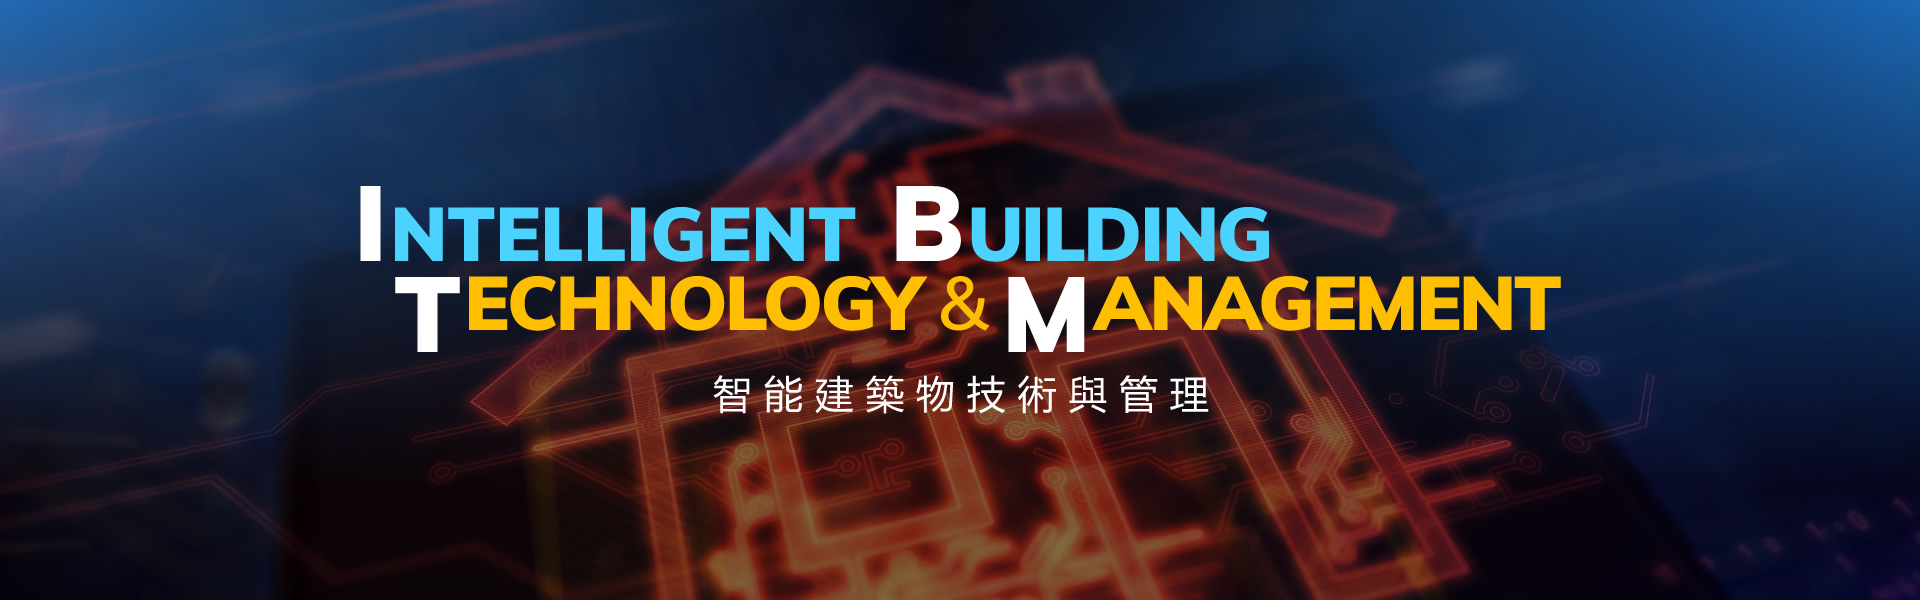 Intelligent Building Technology and Management